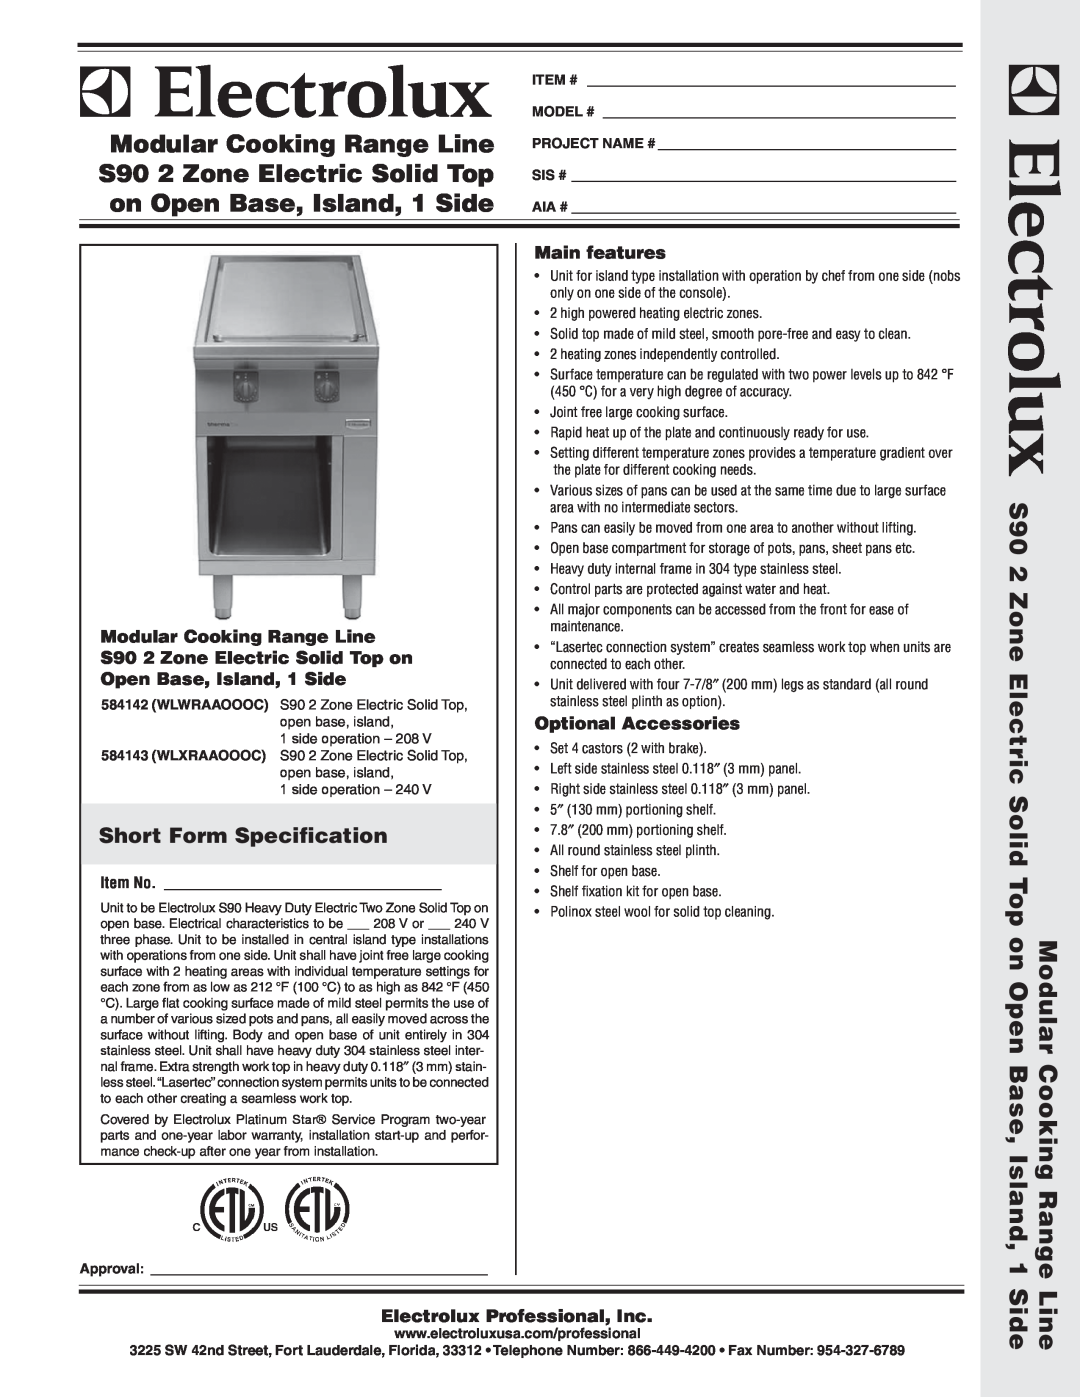 Electrolux WLWRAAOOOC warranty Short Form Specification, Modular Cooking Range Line, Main features, Optional Accessories 